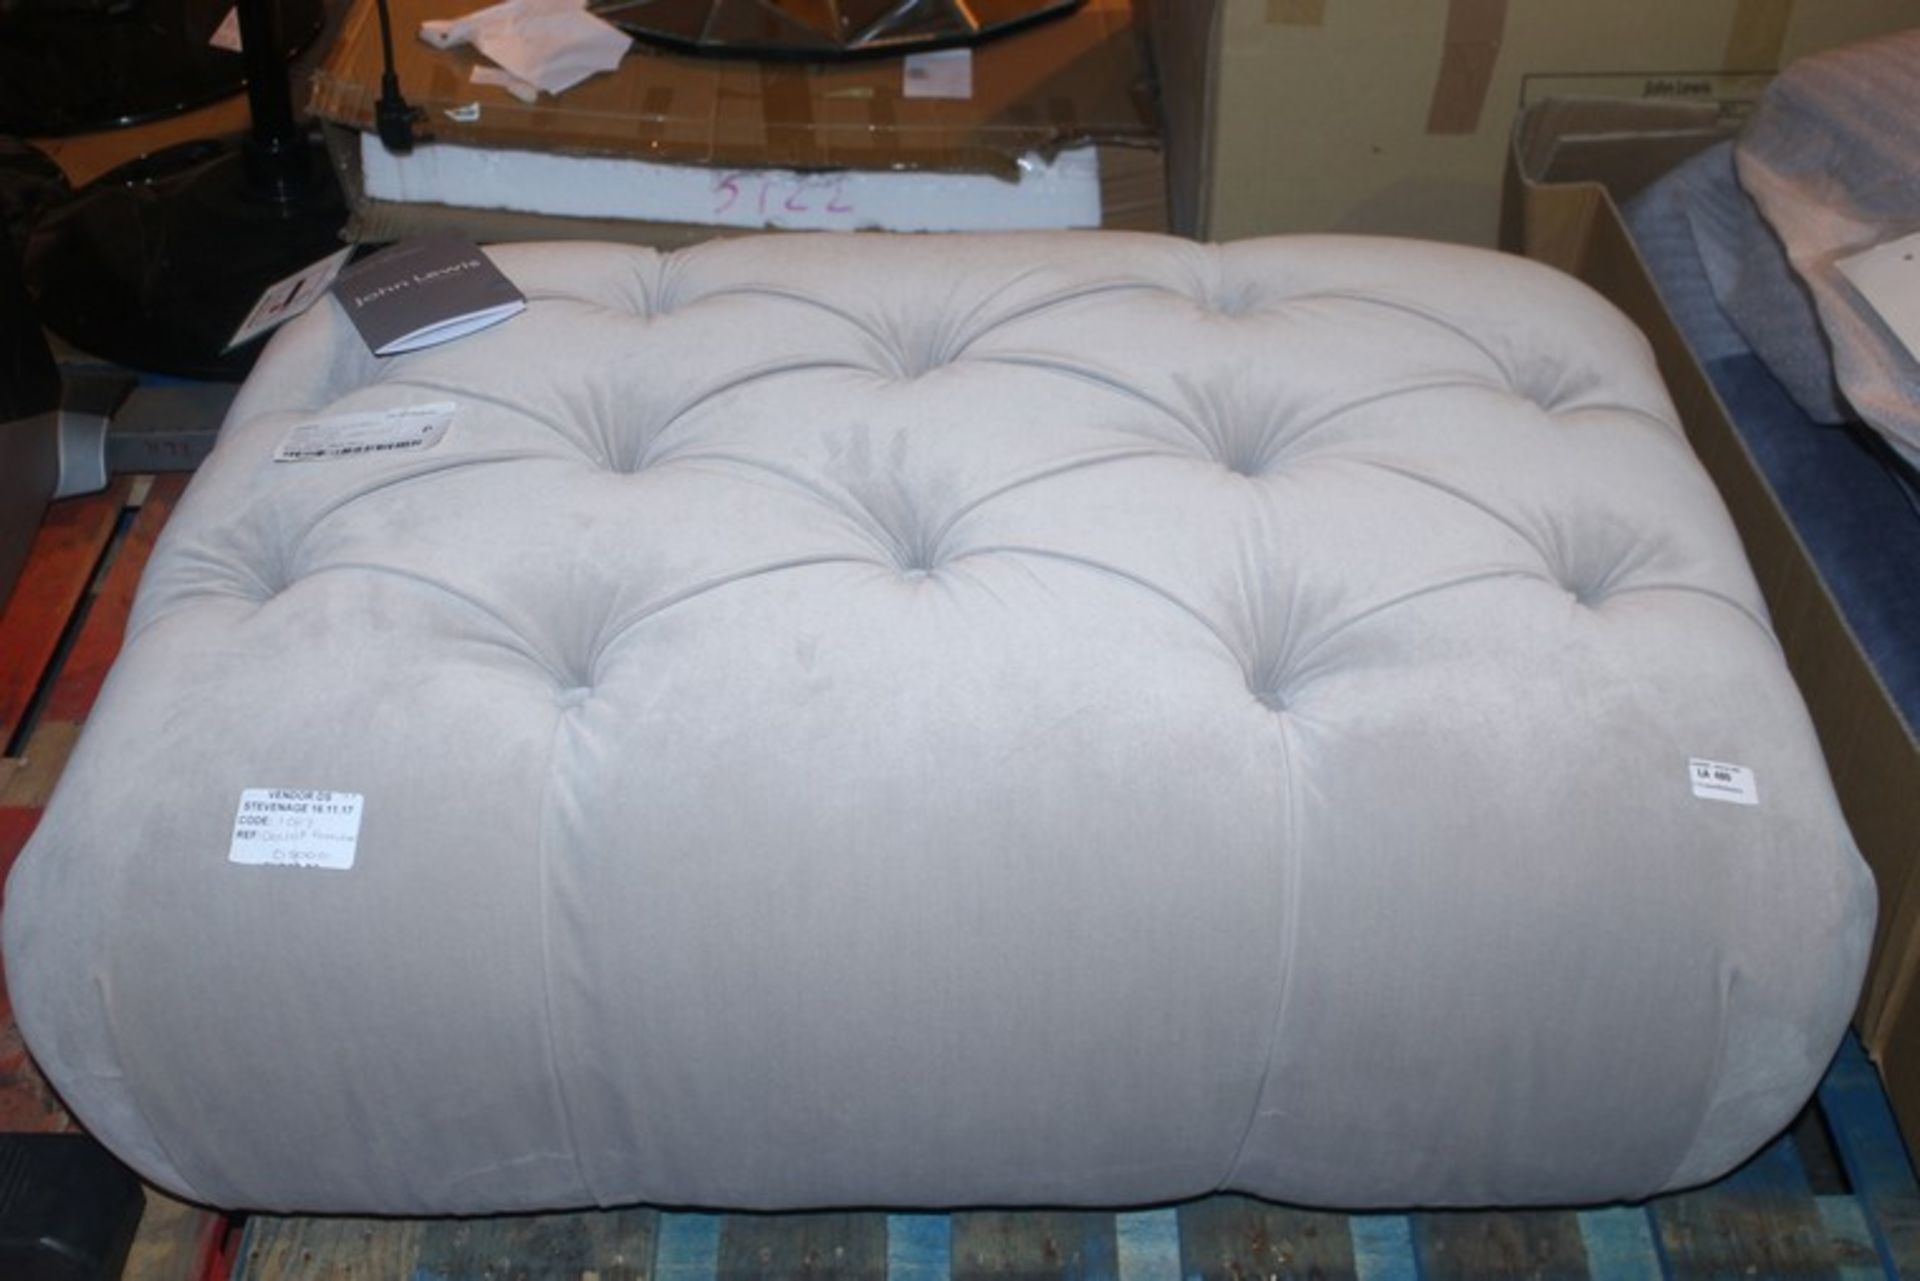 1 x DOLLOP FOOT STOOL IN GREY RRP £500 (16.11.17) (1012) *PLEASE NOTE THAT THE BID PRICE IS